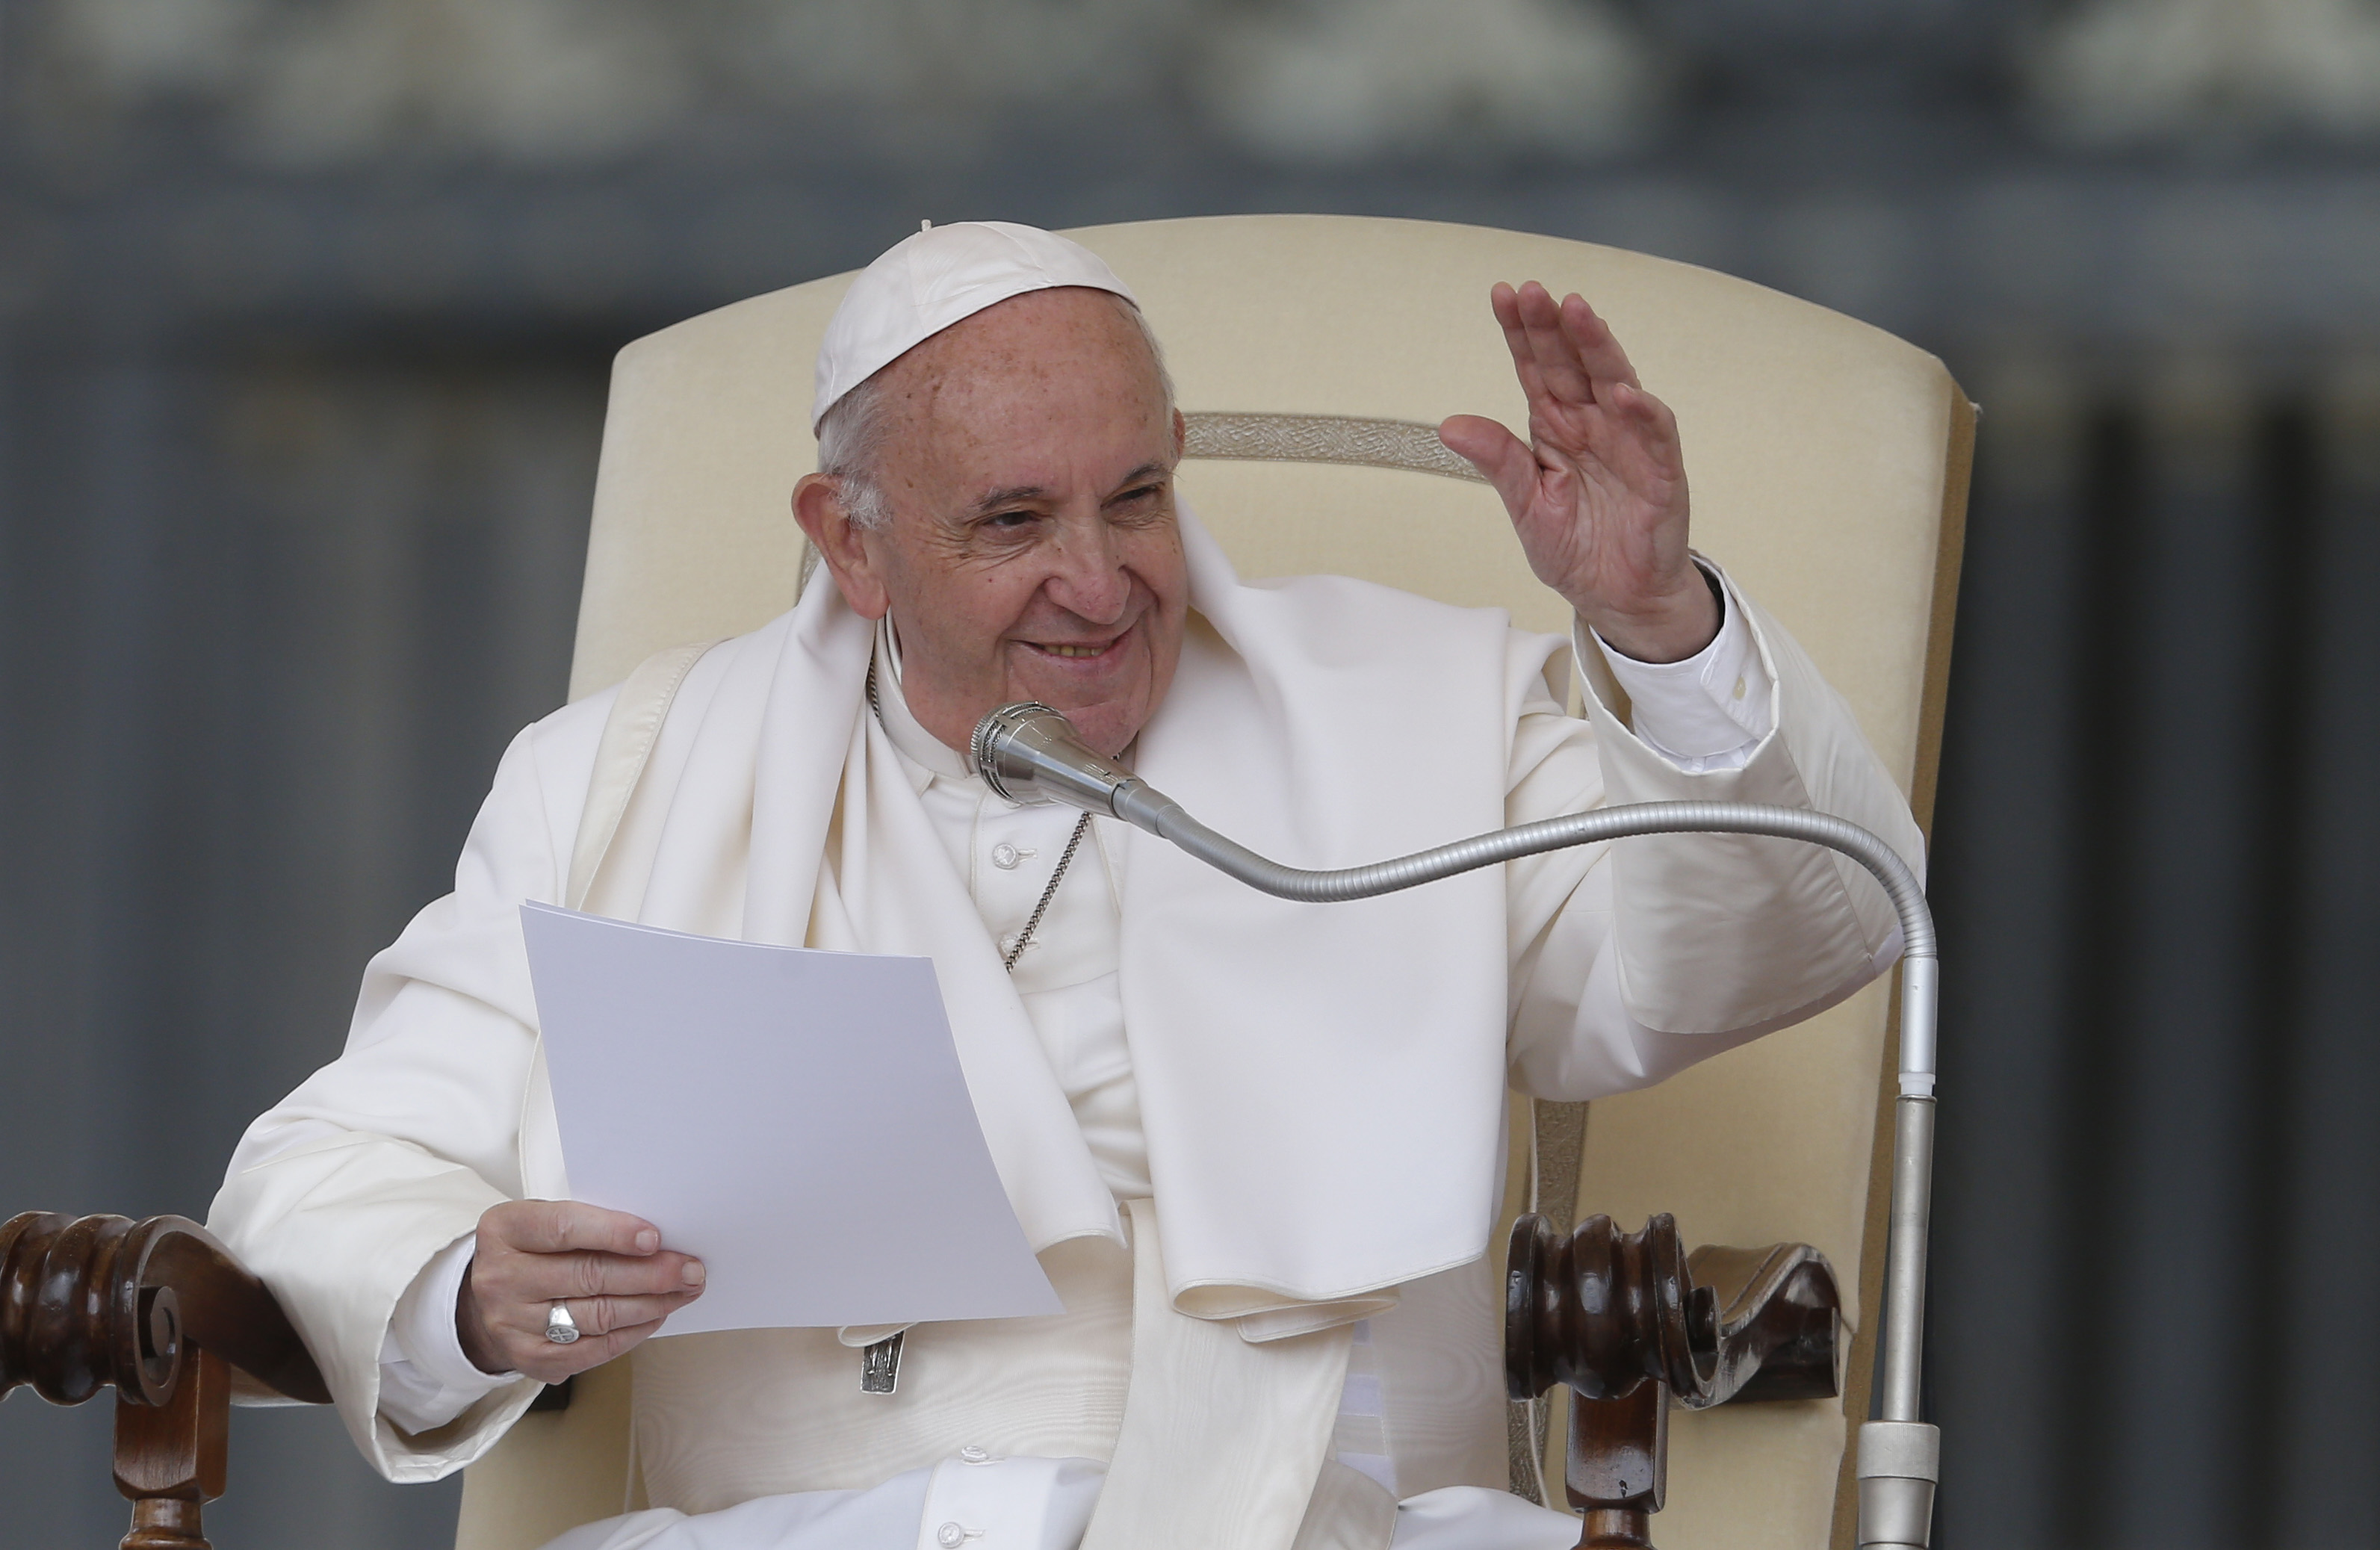 Prayer not possible without Holy Spirit, pope says at audience